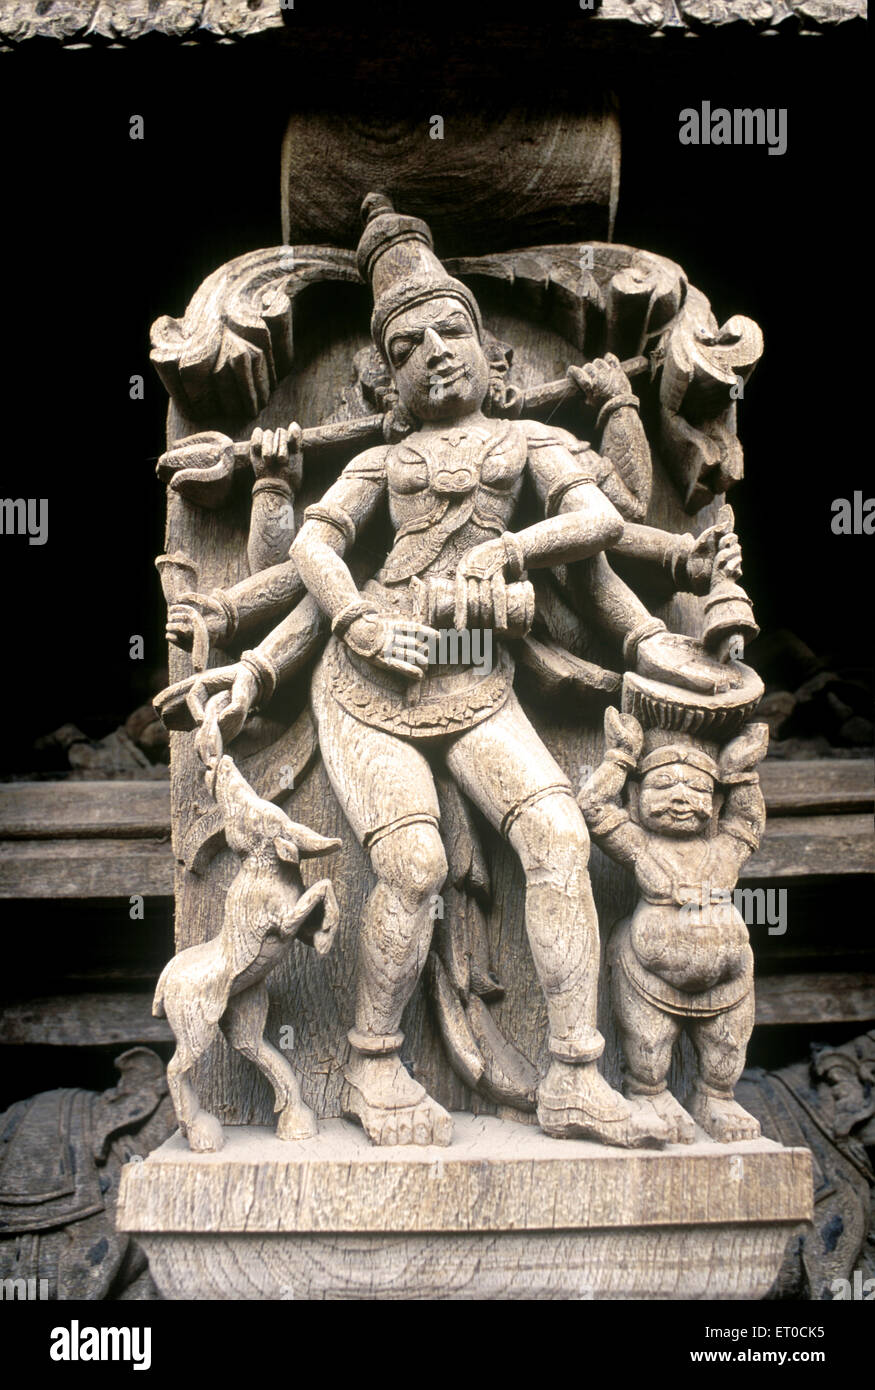 Gangala murthy one of sixty four forms of lord Shiva wooden carving statues in old temple chariot at Madurai Stock Photo